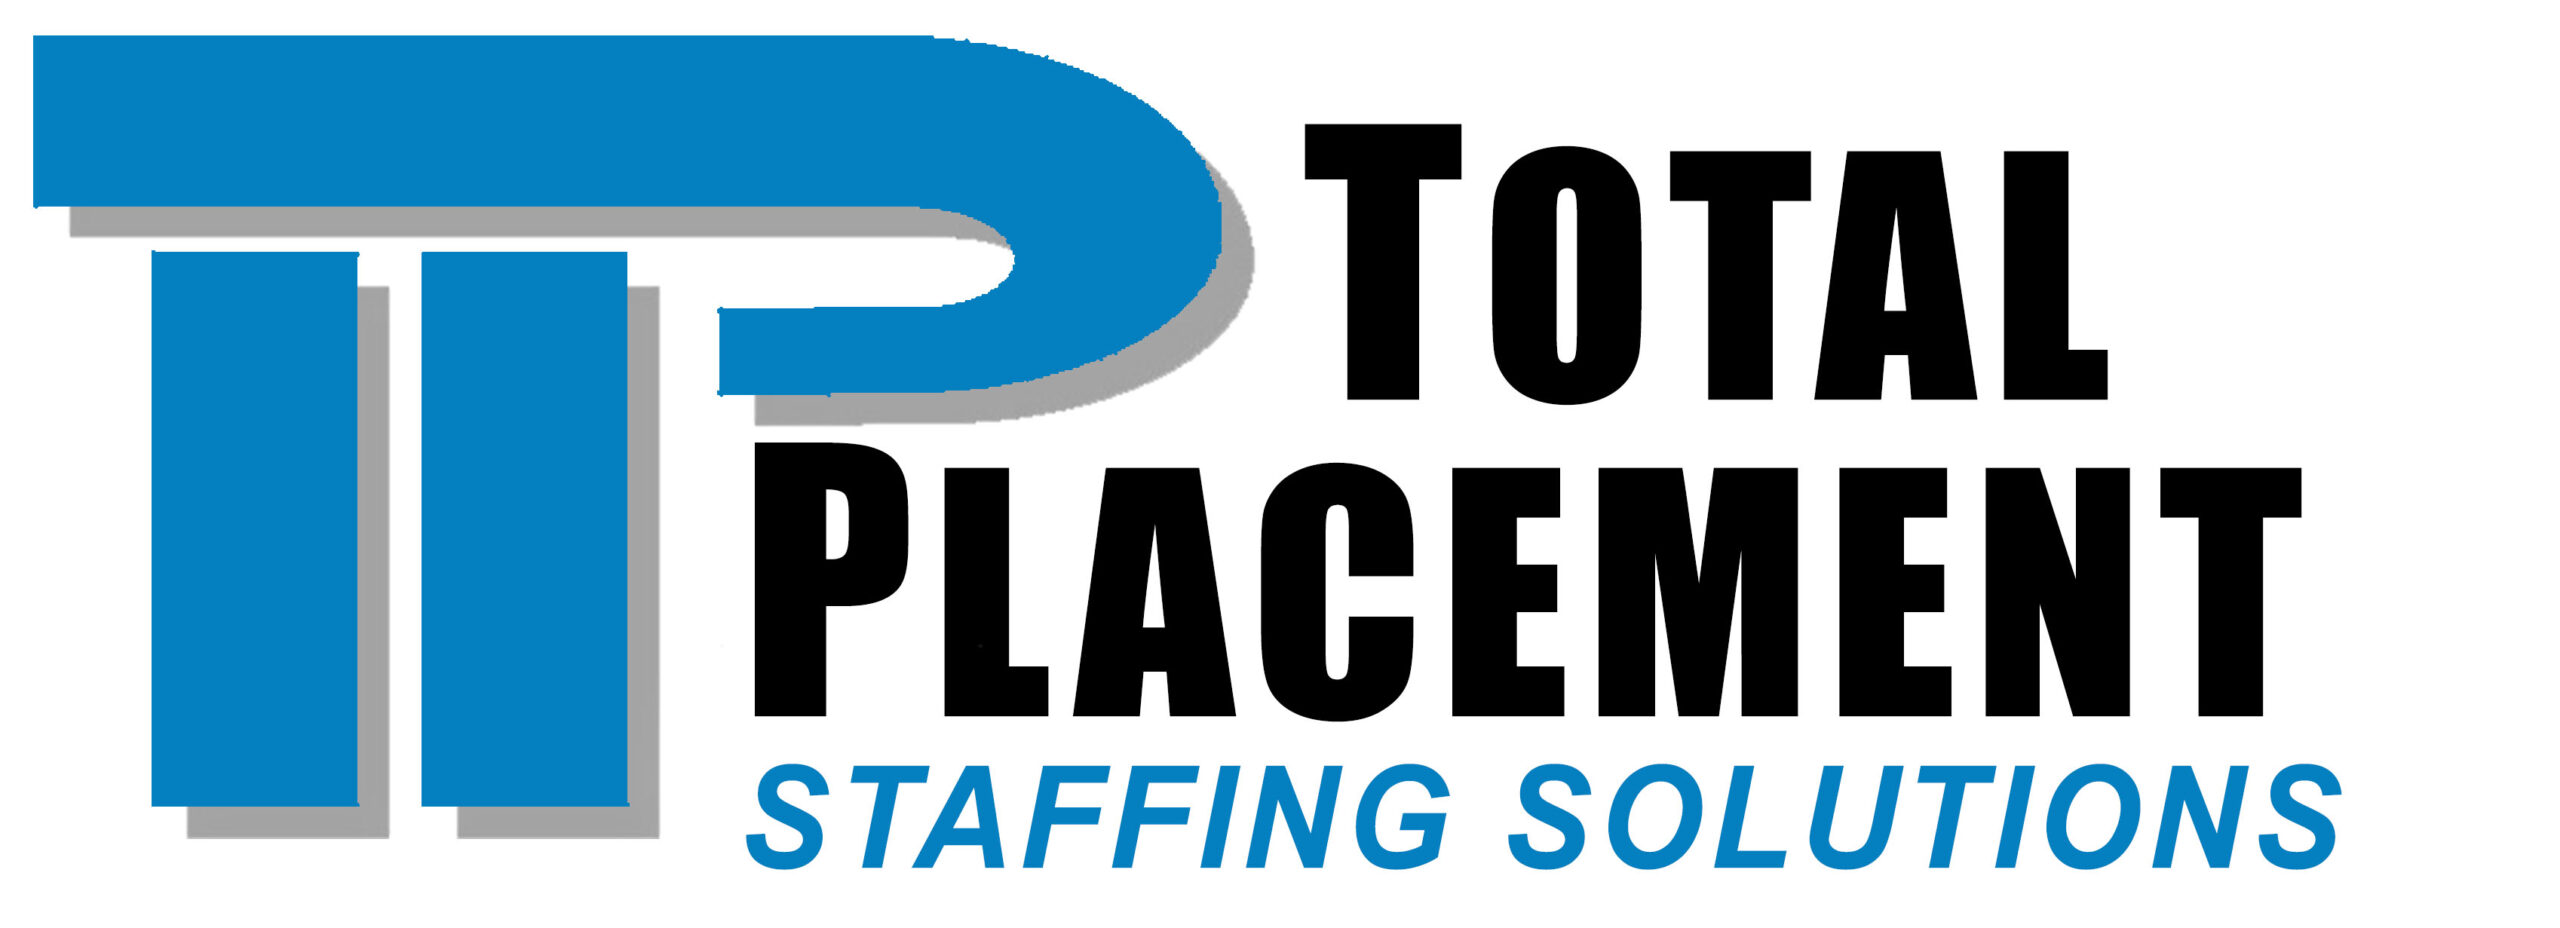 Total Placement Staffing Solutions logo